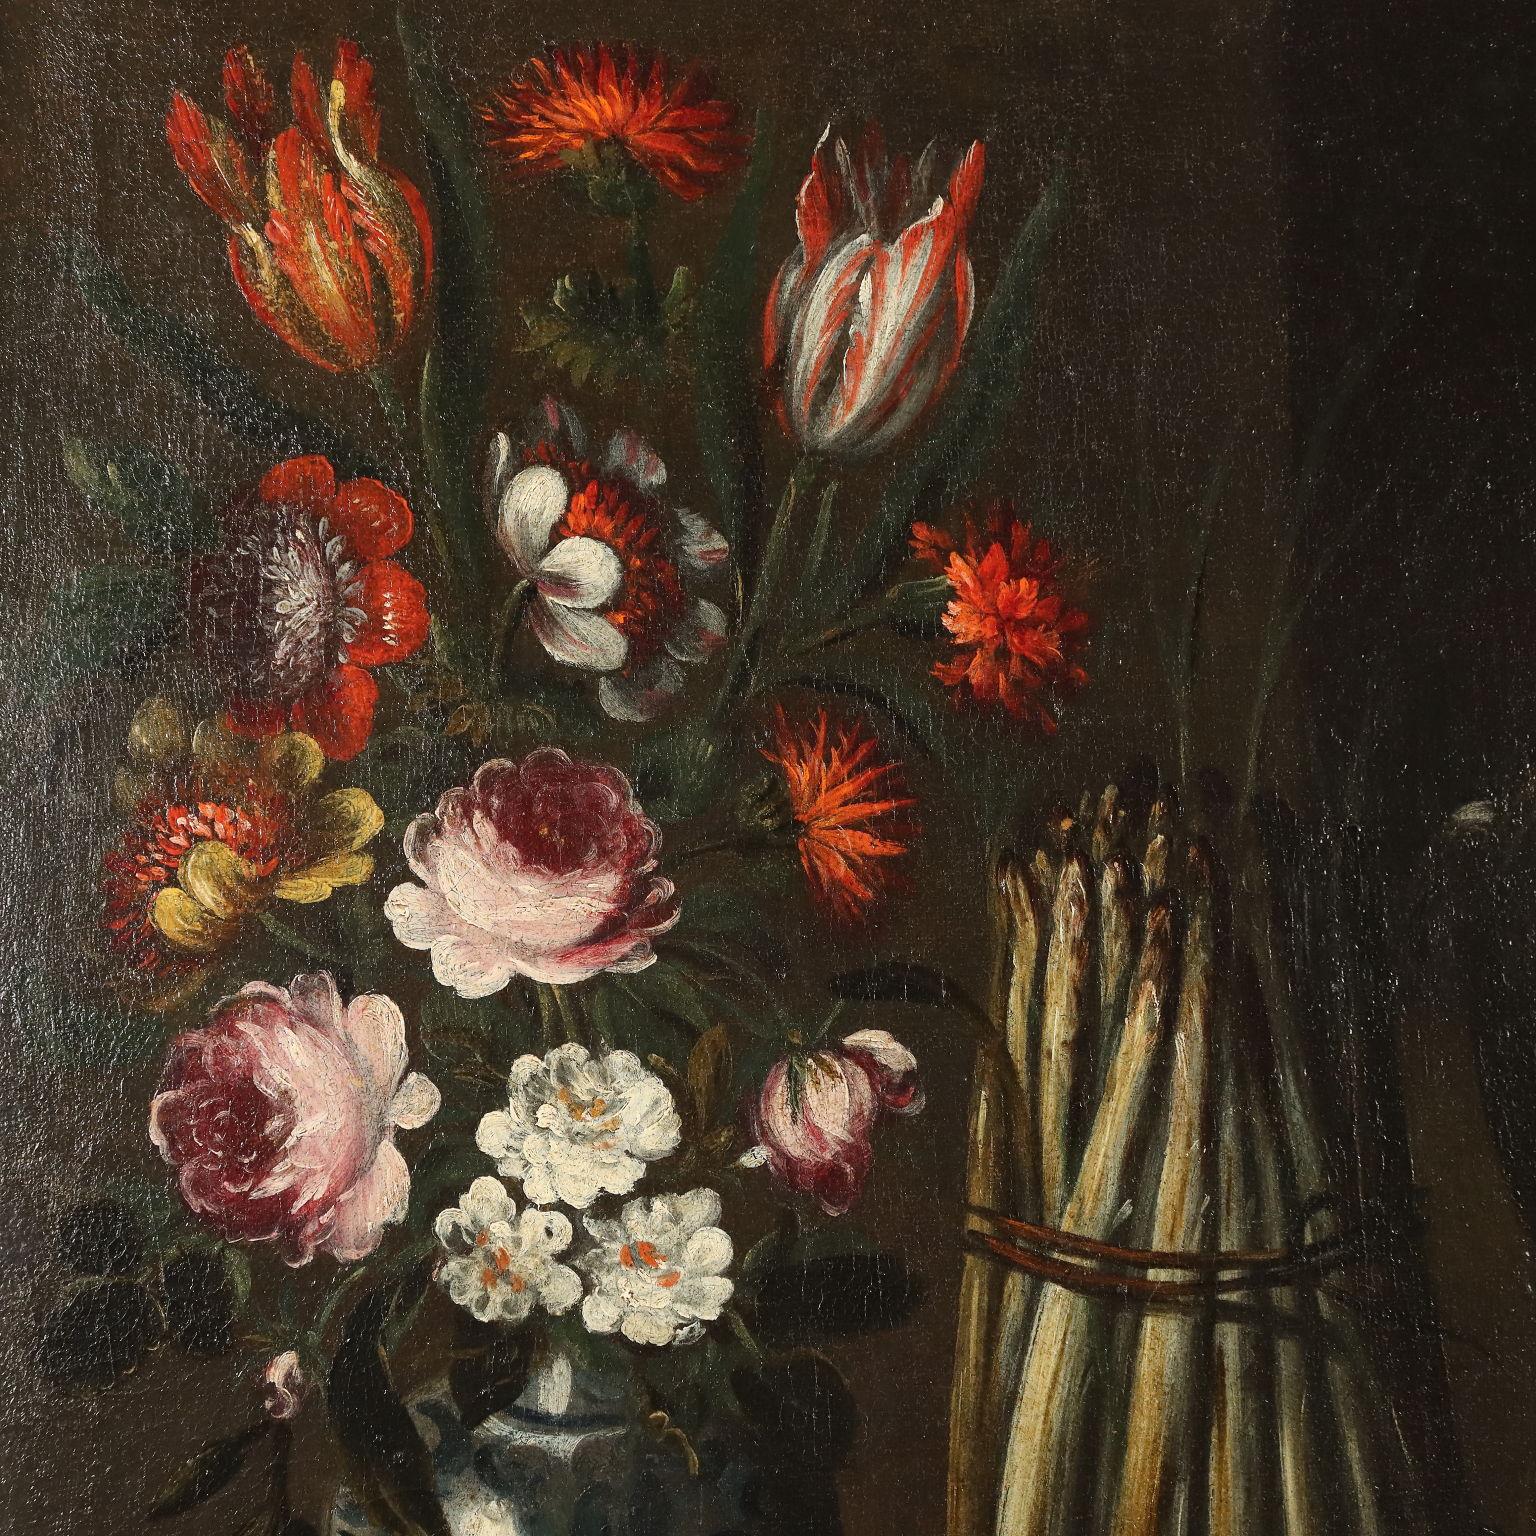 Oil on Canvas.
The composition features the following in the center  a hanging hare, flanked by some quail and a pigeon; on the destr side, a wicker basket containing chestnuts and pine branches; on the left side, a bunch of asparagus and a vase of